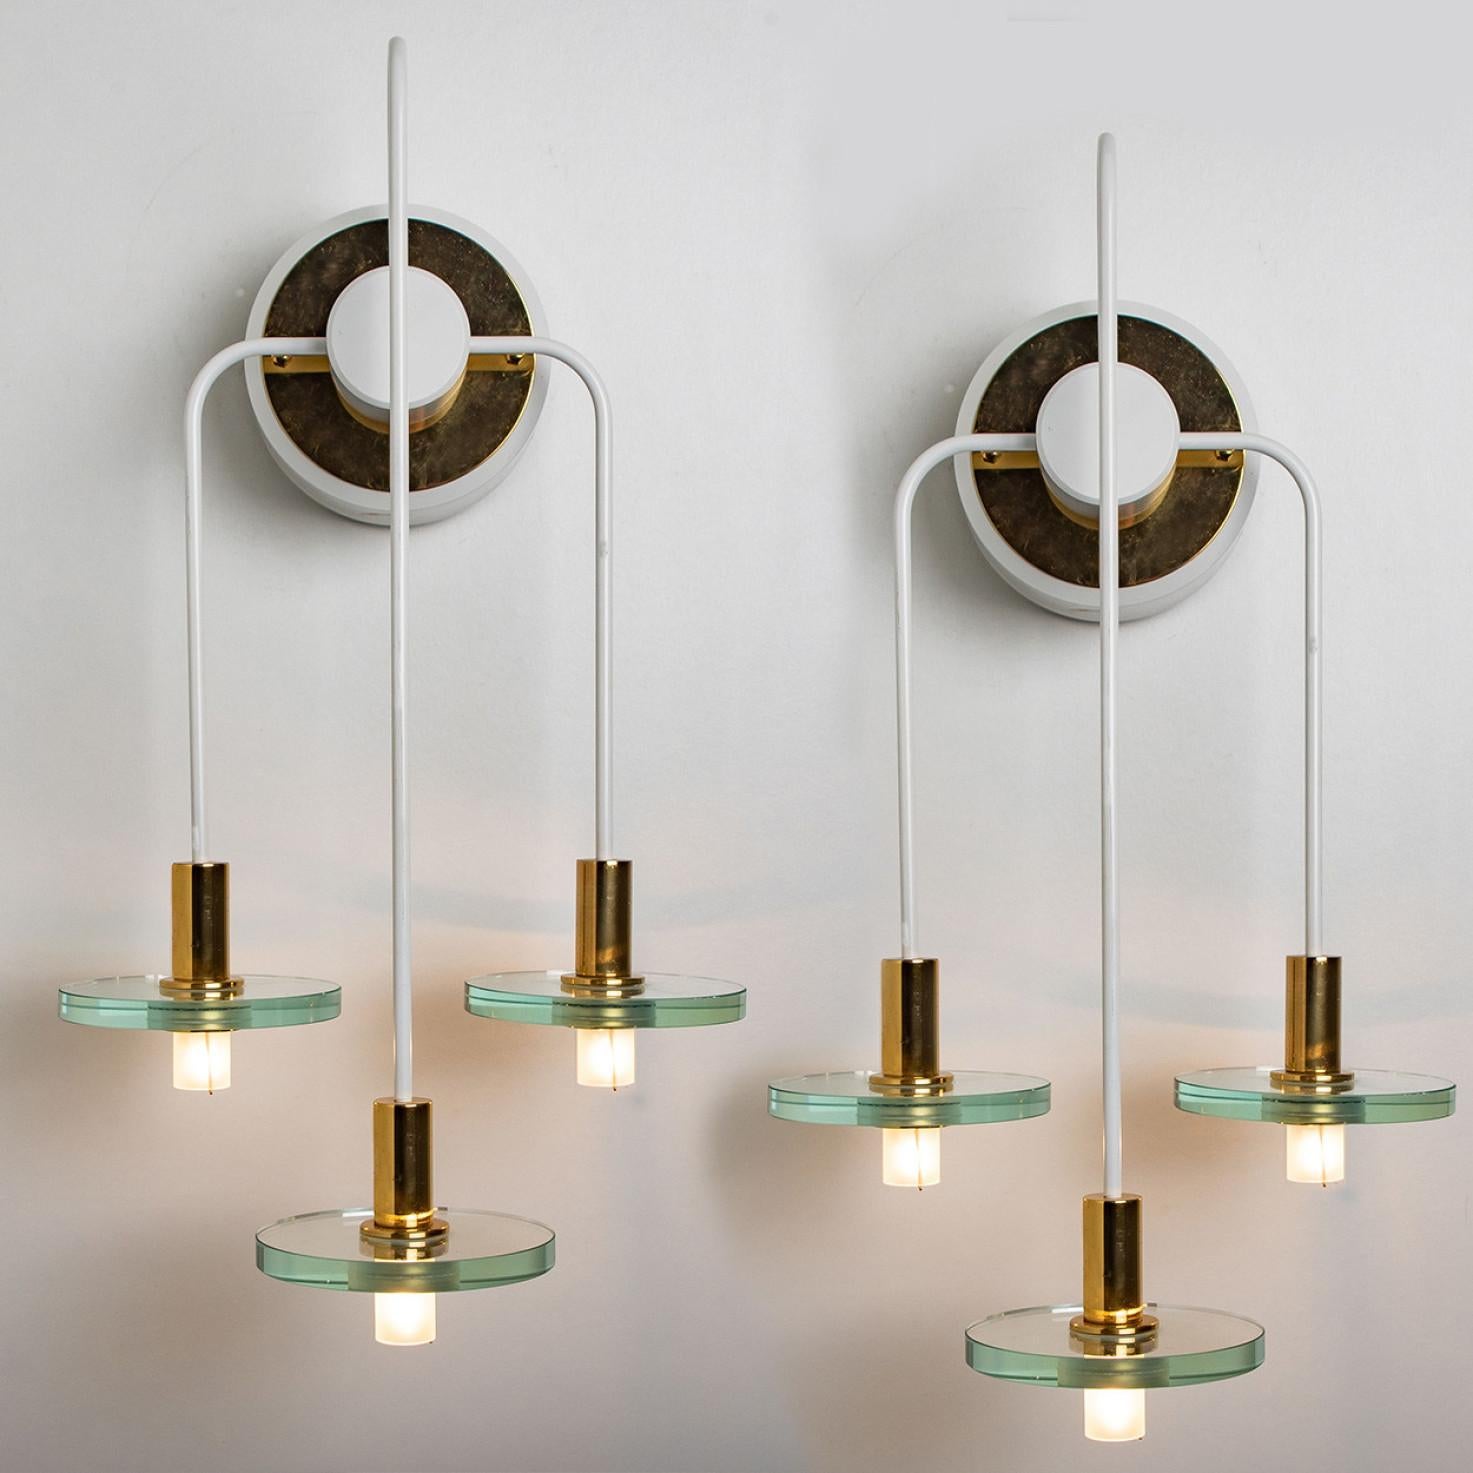 These unique wall sconces are designed and manufactured by the iconic firm of Kalmar Lighting, Germany around 1970.
They have a spacial look, because of the white metal with brass details and think glass discs.

The lights can be hung in different